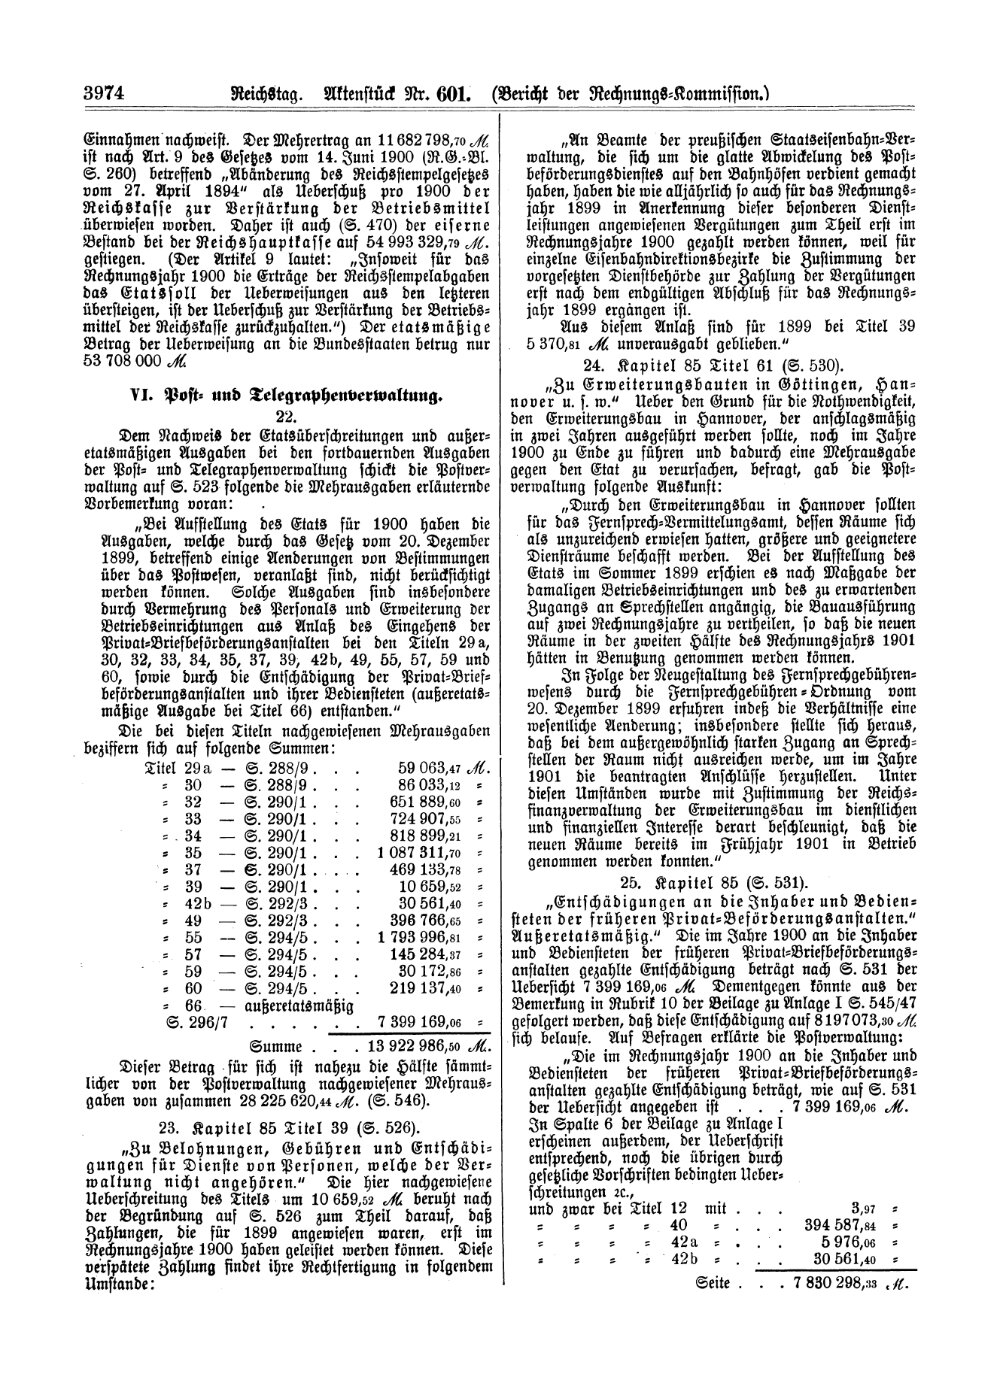 Scan of page 3974